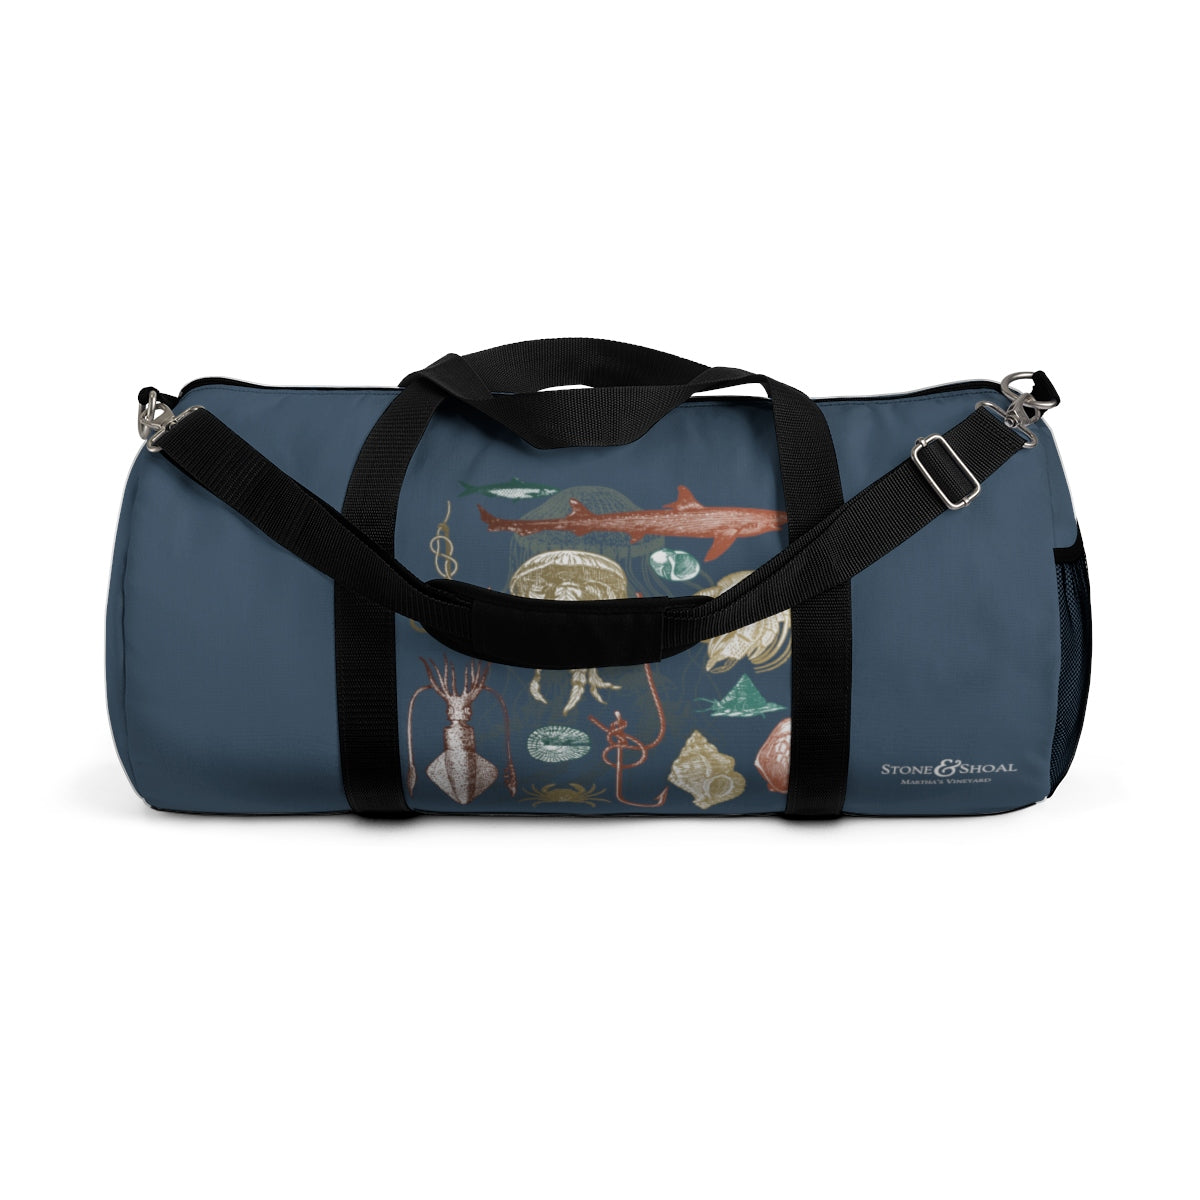 Mojave Sky Duffle Bag by STS – Indian Traders (L7 Enterprises)